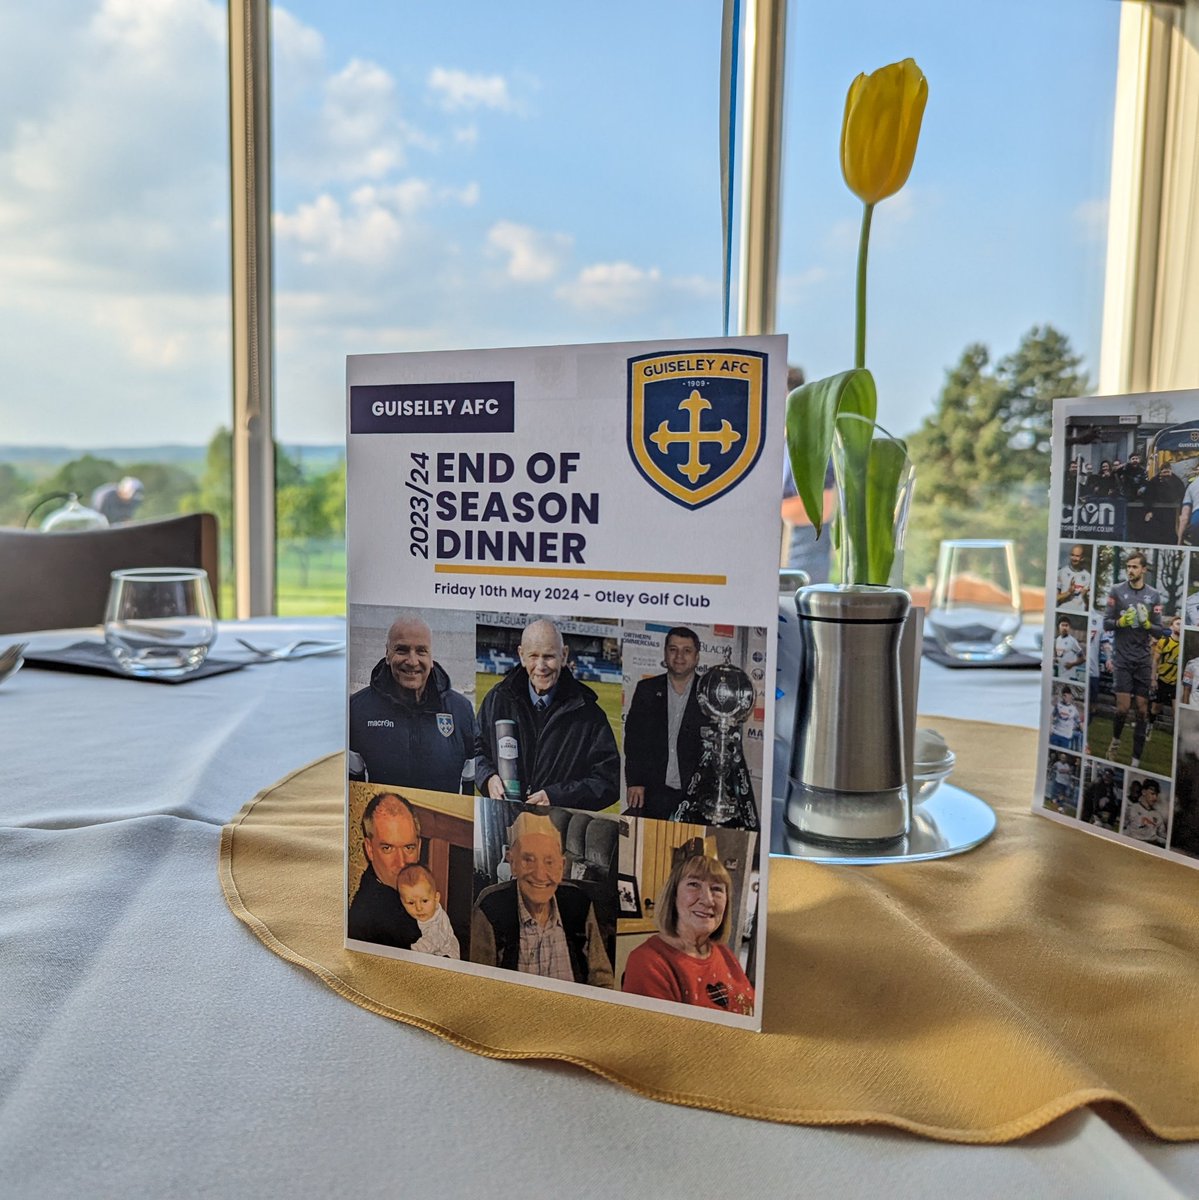 🏆 | One final get together to mark the 2023/24 campaign. We're at Otley Golf Club for tonight's End of Season Dinner! #GAFC #GuiseleyTogether